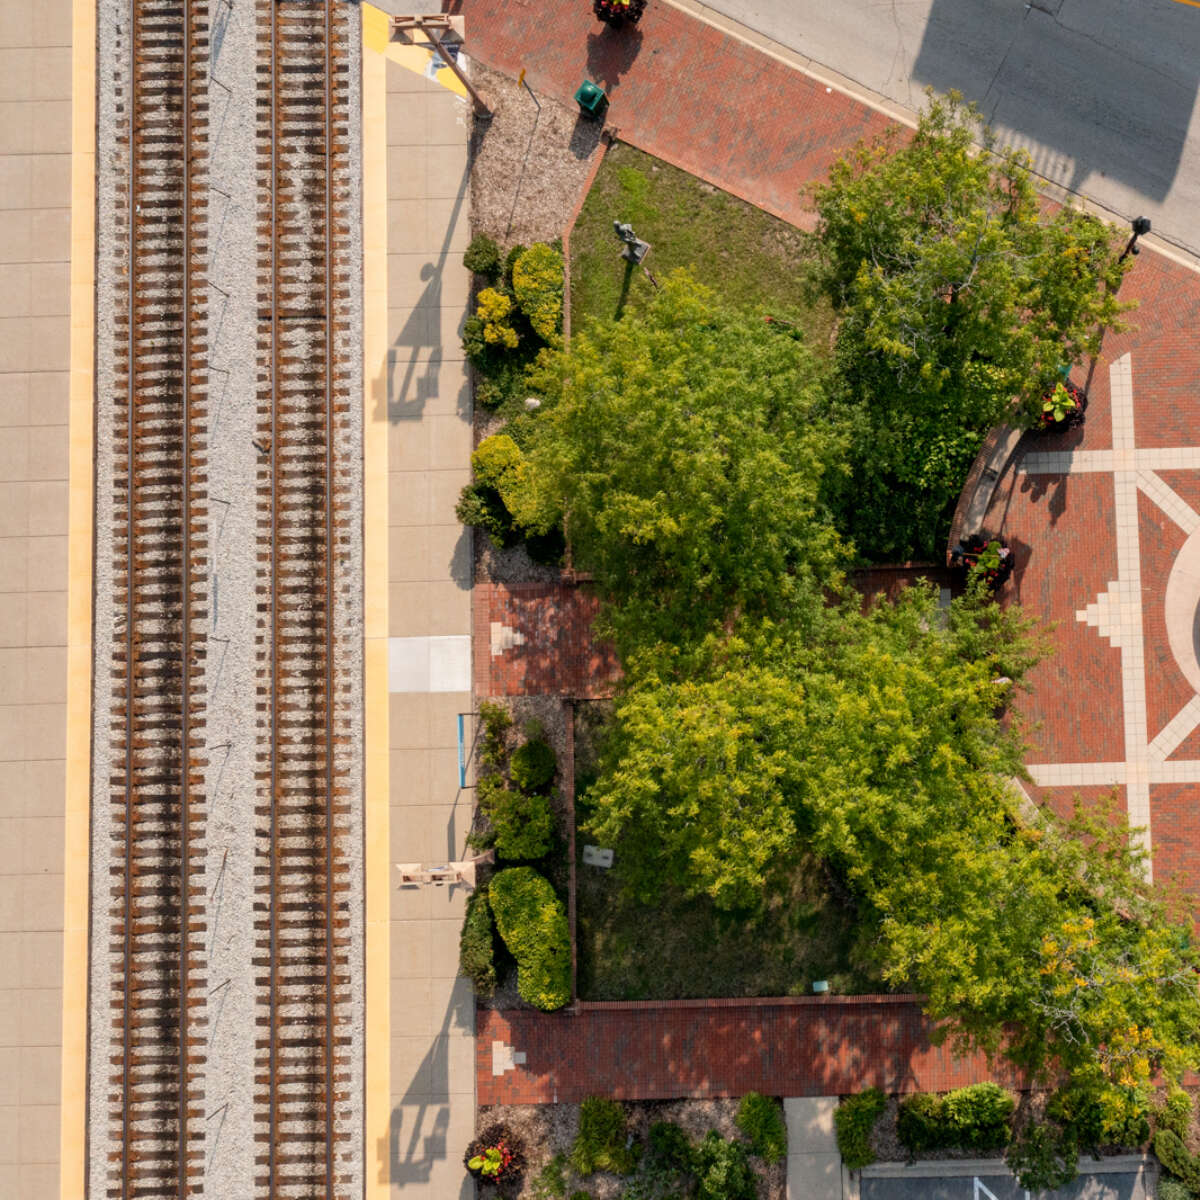 An aerial shot of train tracks, grass and trees, and a plaza with a fountain.